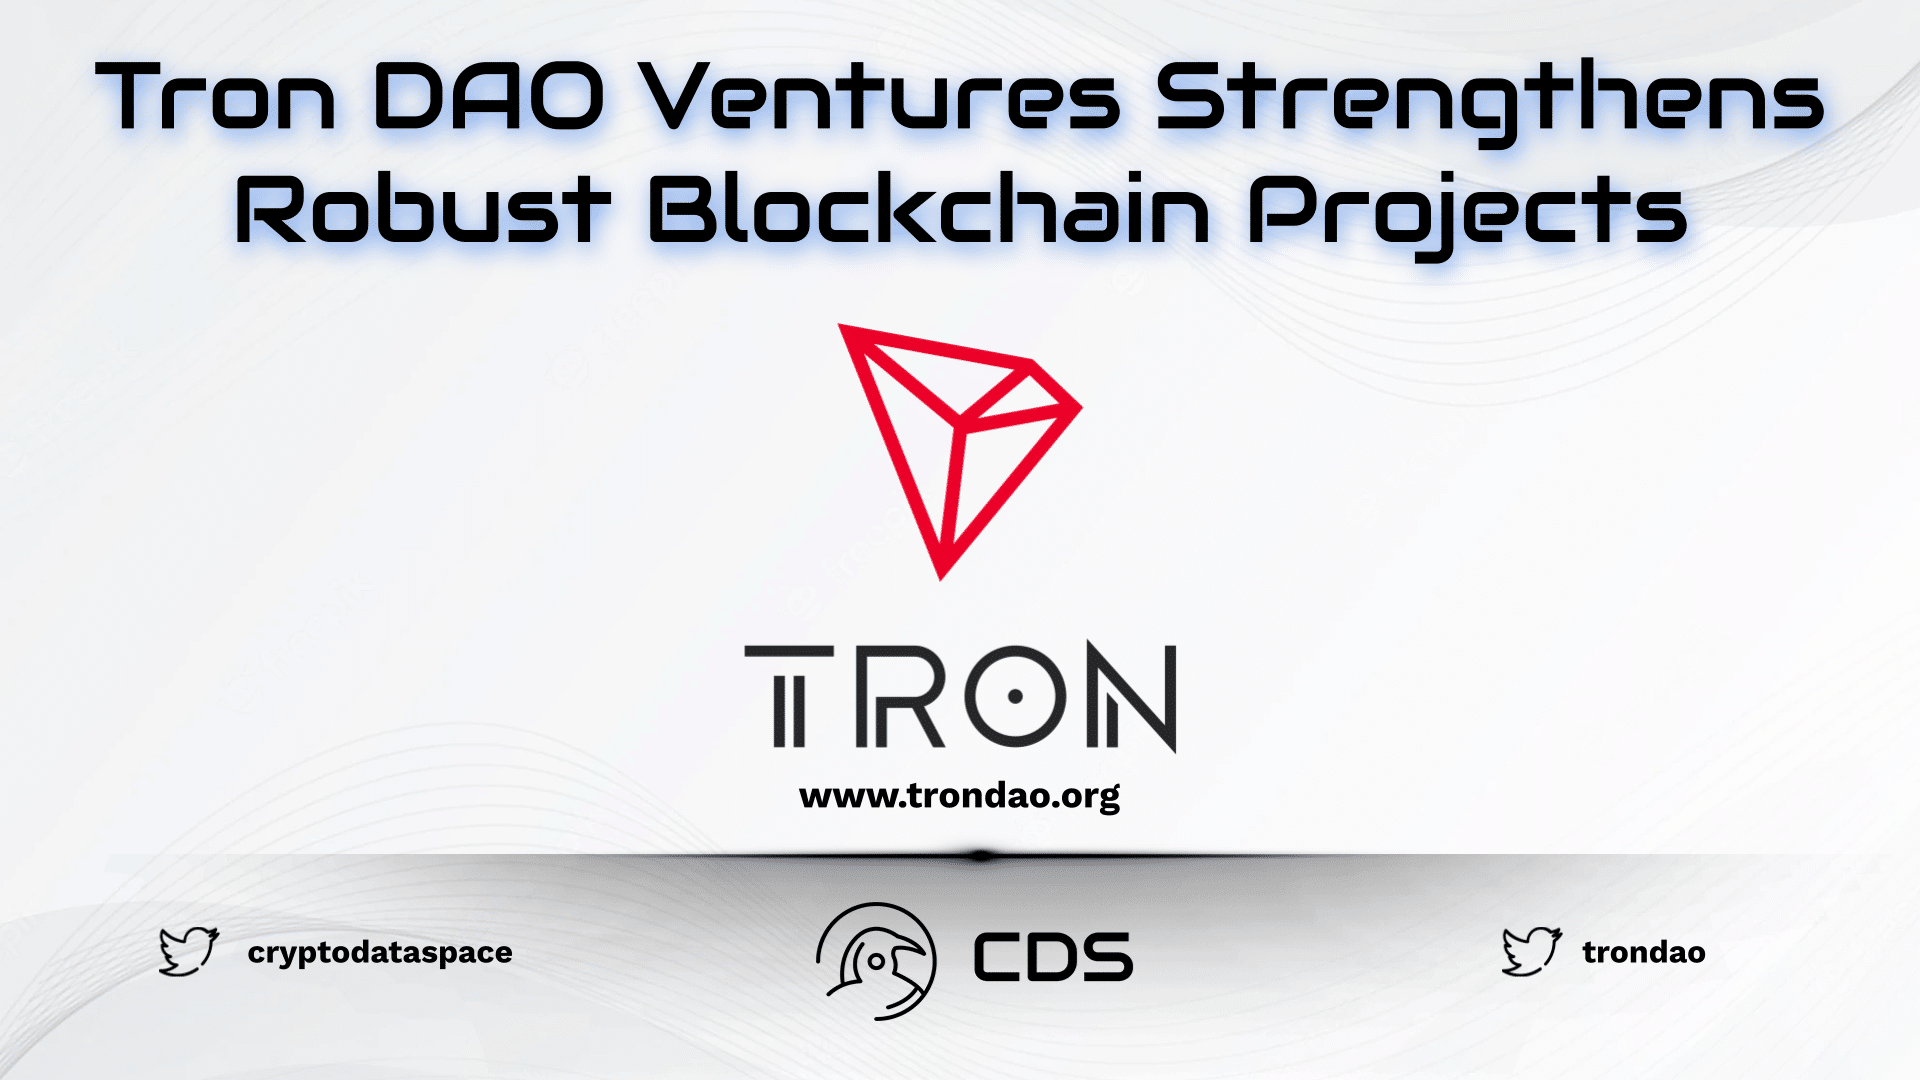 Tron DAO Ventures Strengthens Robust Blockchain Projects